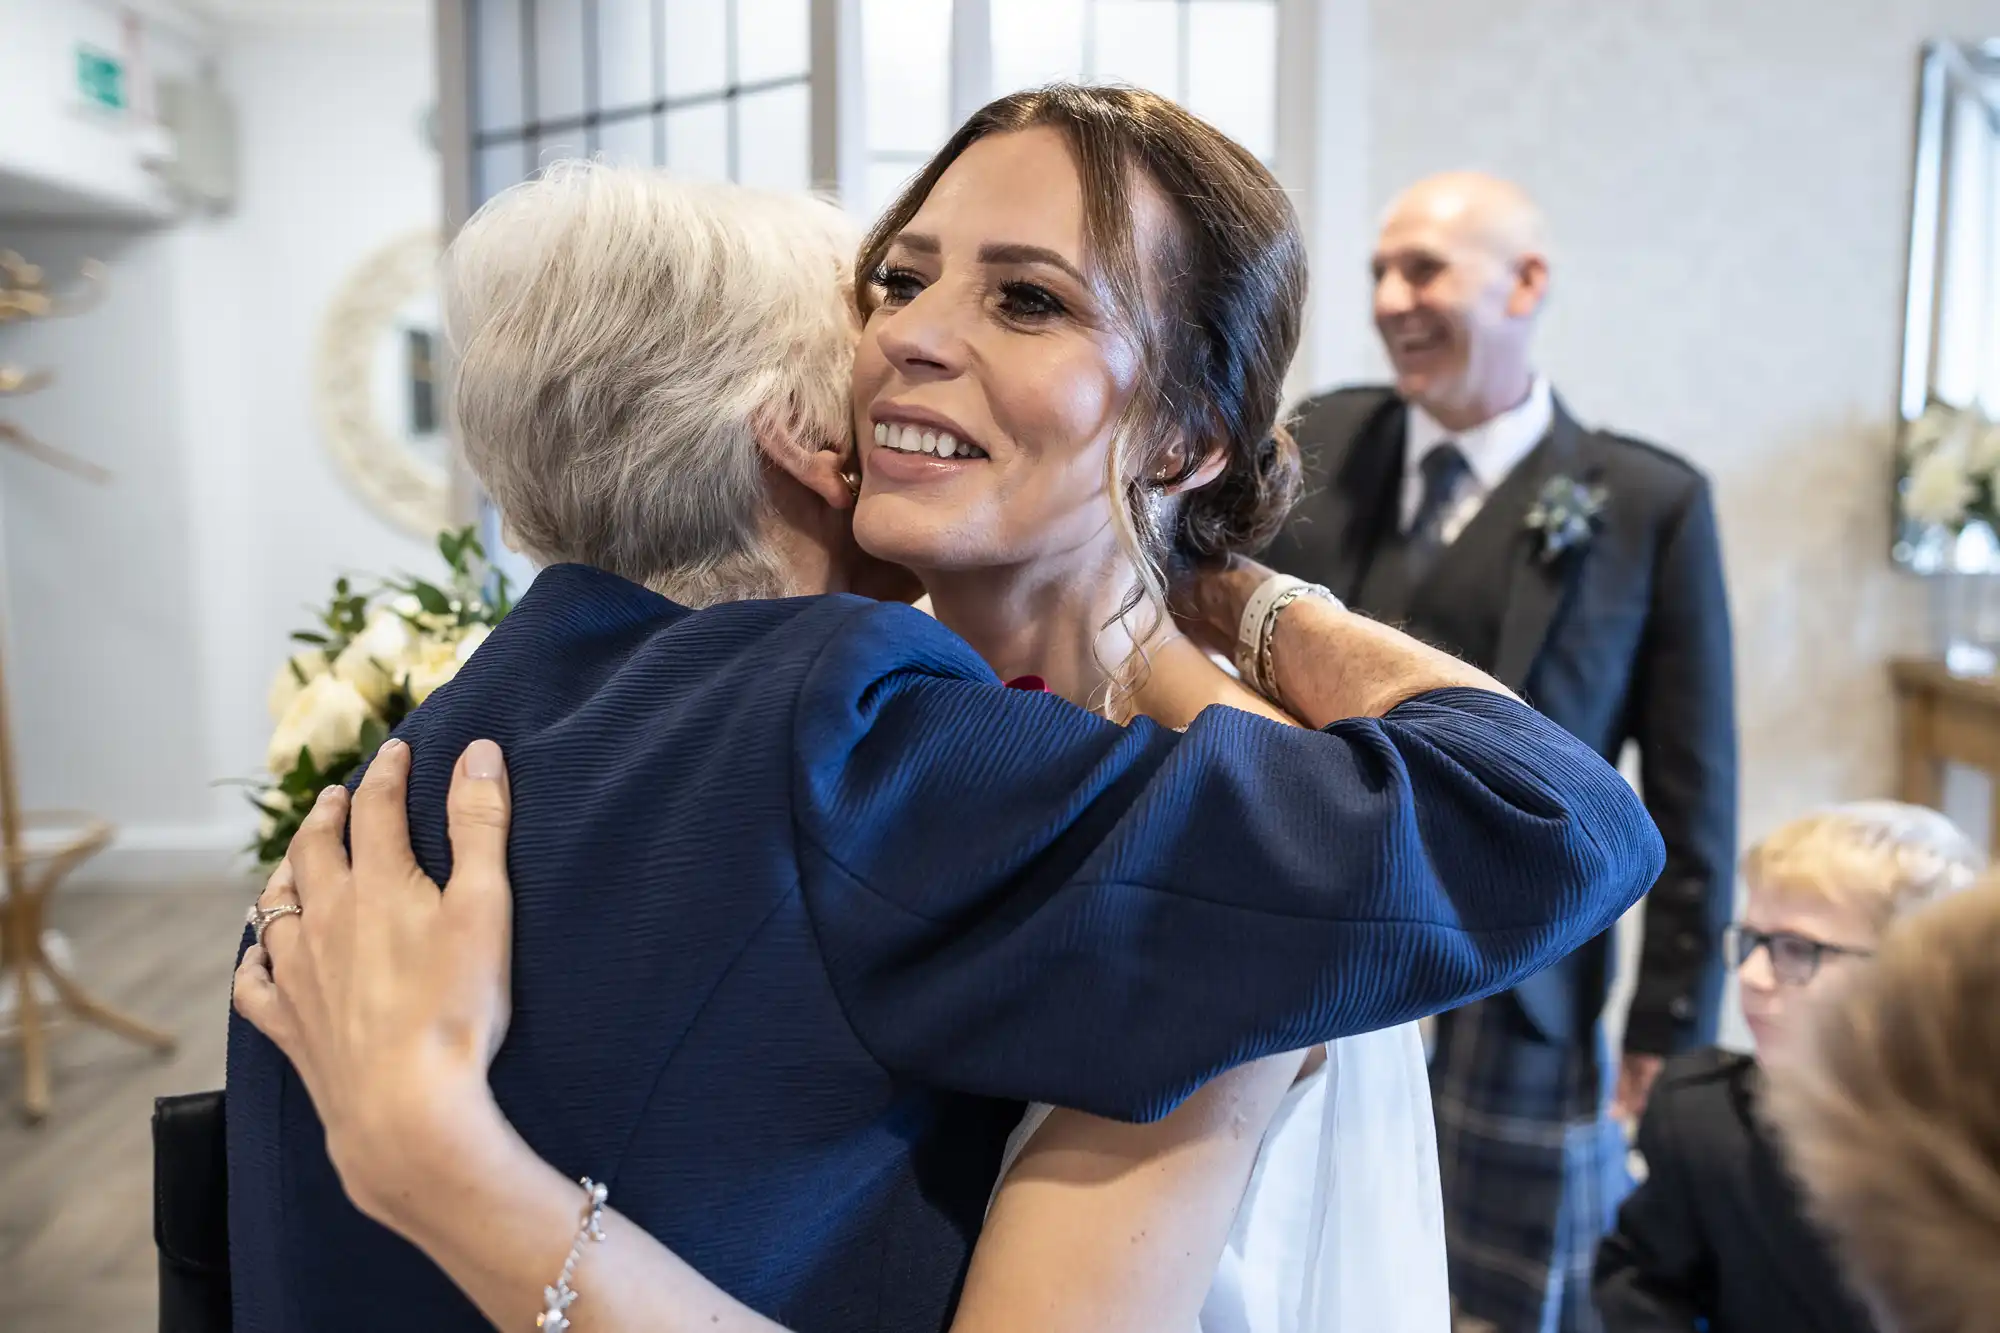 A bride in a white dress is hugging an older lady in a blue outfit. A man in a suit stands smiling in the background.